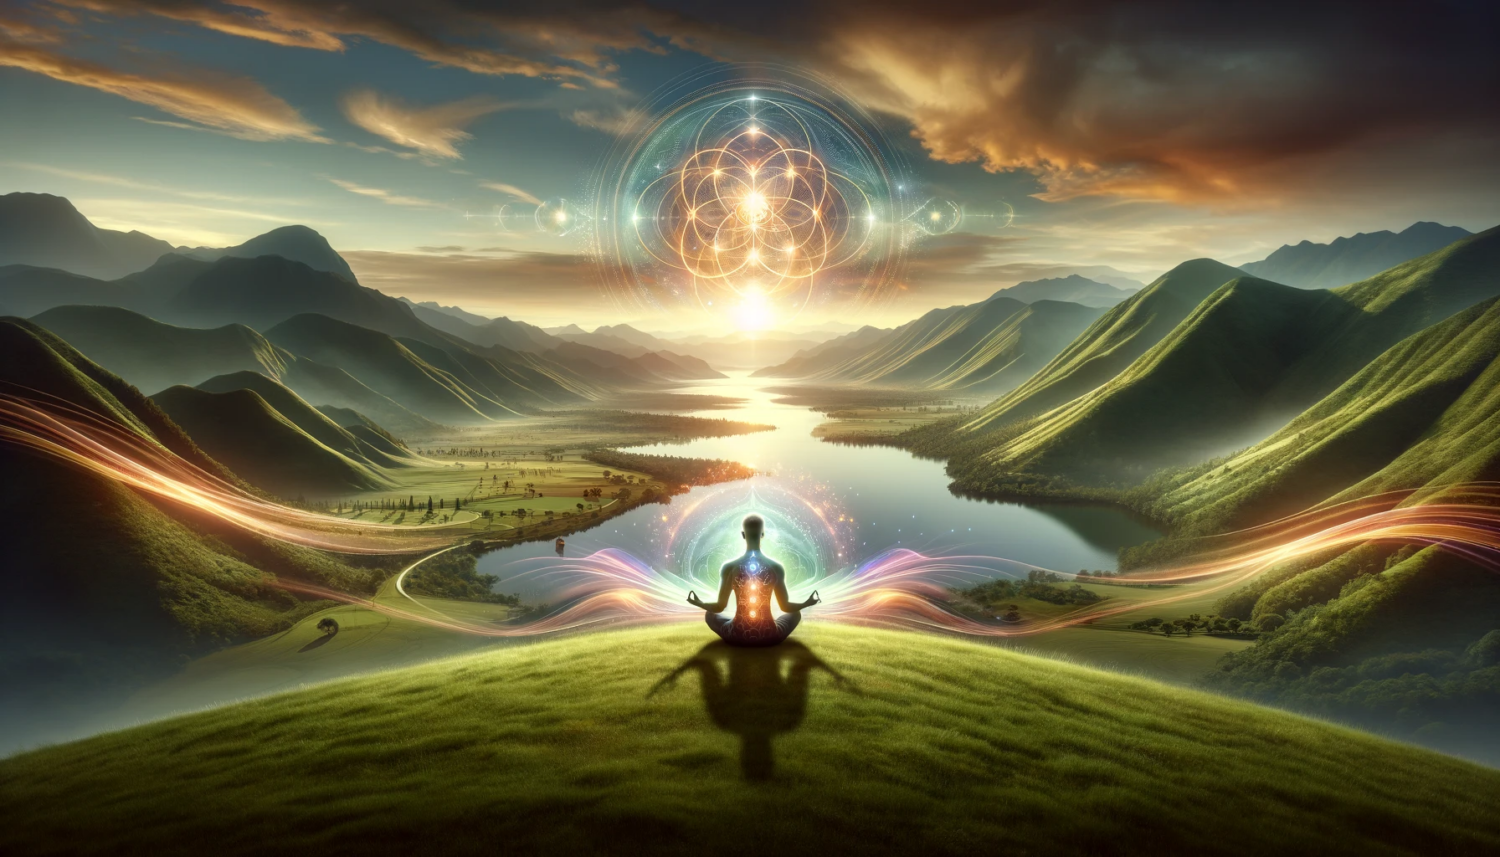 A tranquil landscape featuring an individual meditating in a serene environment, designed in a wide, landscape orientation. The meditator is seated in the classic lotus pose on a verdant hill, with a panoramic view of a vast, tranquil lake in the background. Majestic mountains rise in the distance, and the sky is painted with the soft, warm hues of sunset. Surrounding the meditator are ethereal, glowing auras in a spectrum of radiant colors, symbolizing their deep inner peace and spiritual energy. The scene is peaceful, with the wide landscape emphasizing the vastness and beauty of nature.